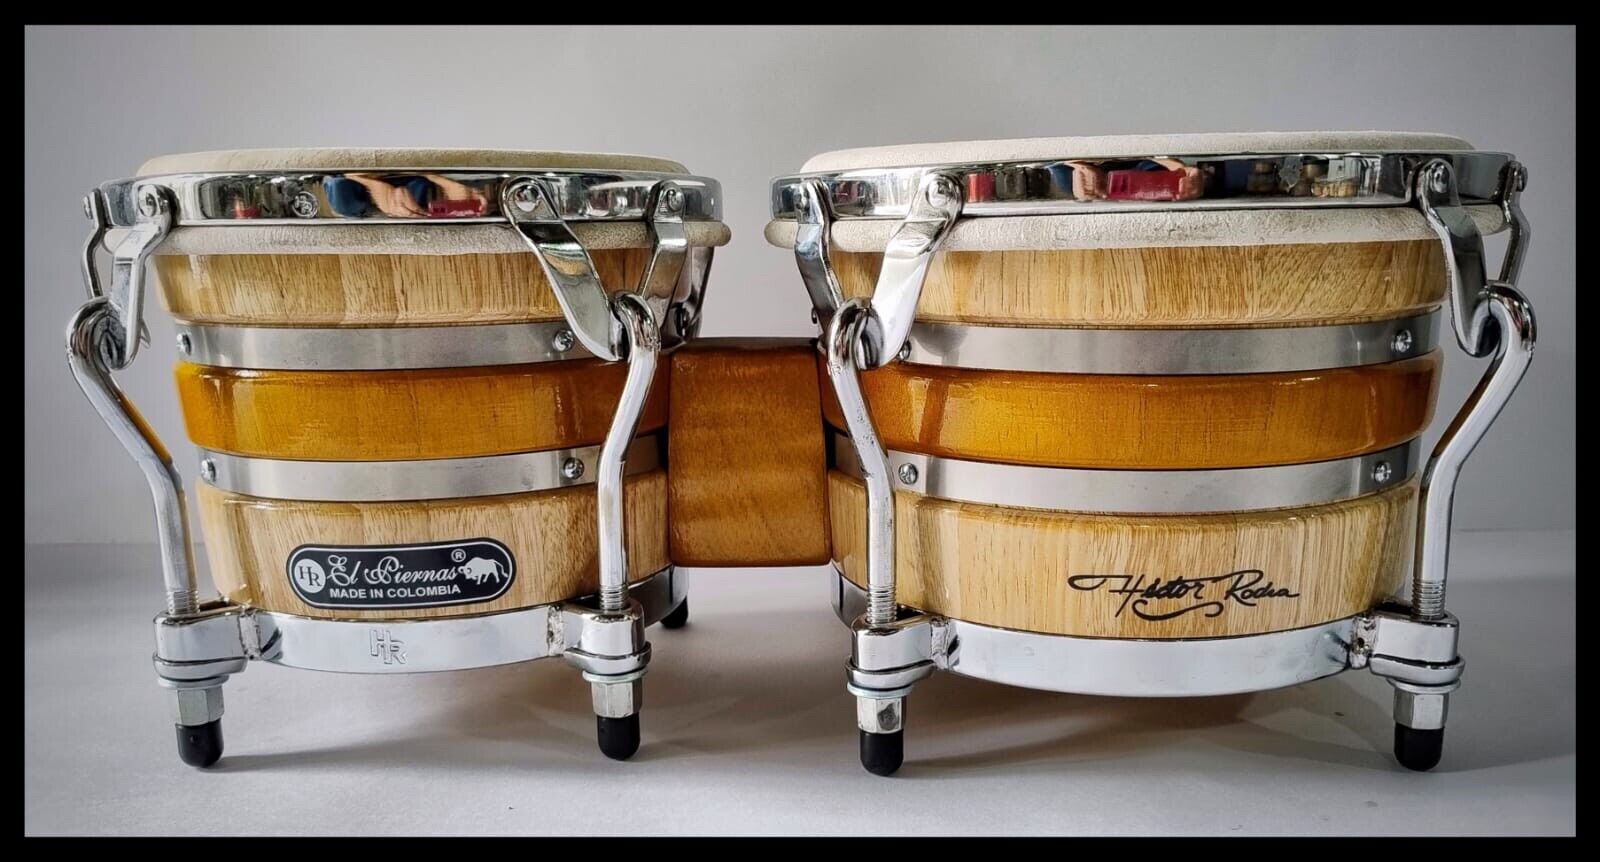 This Is A Set Hand Made HR El piernas Bongo From Colombia Natural Wood